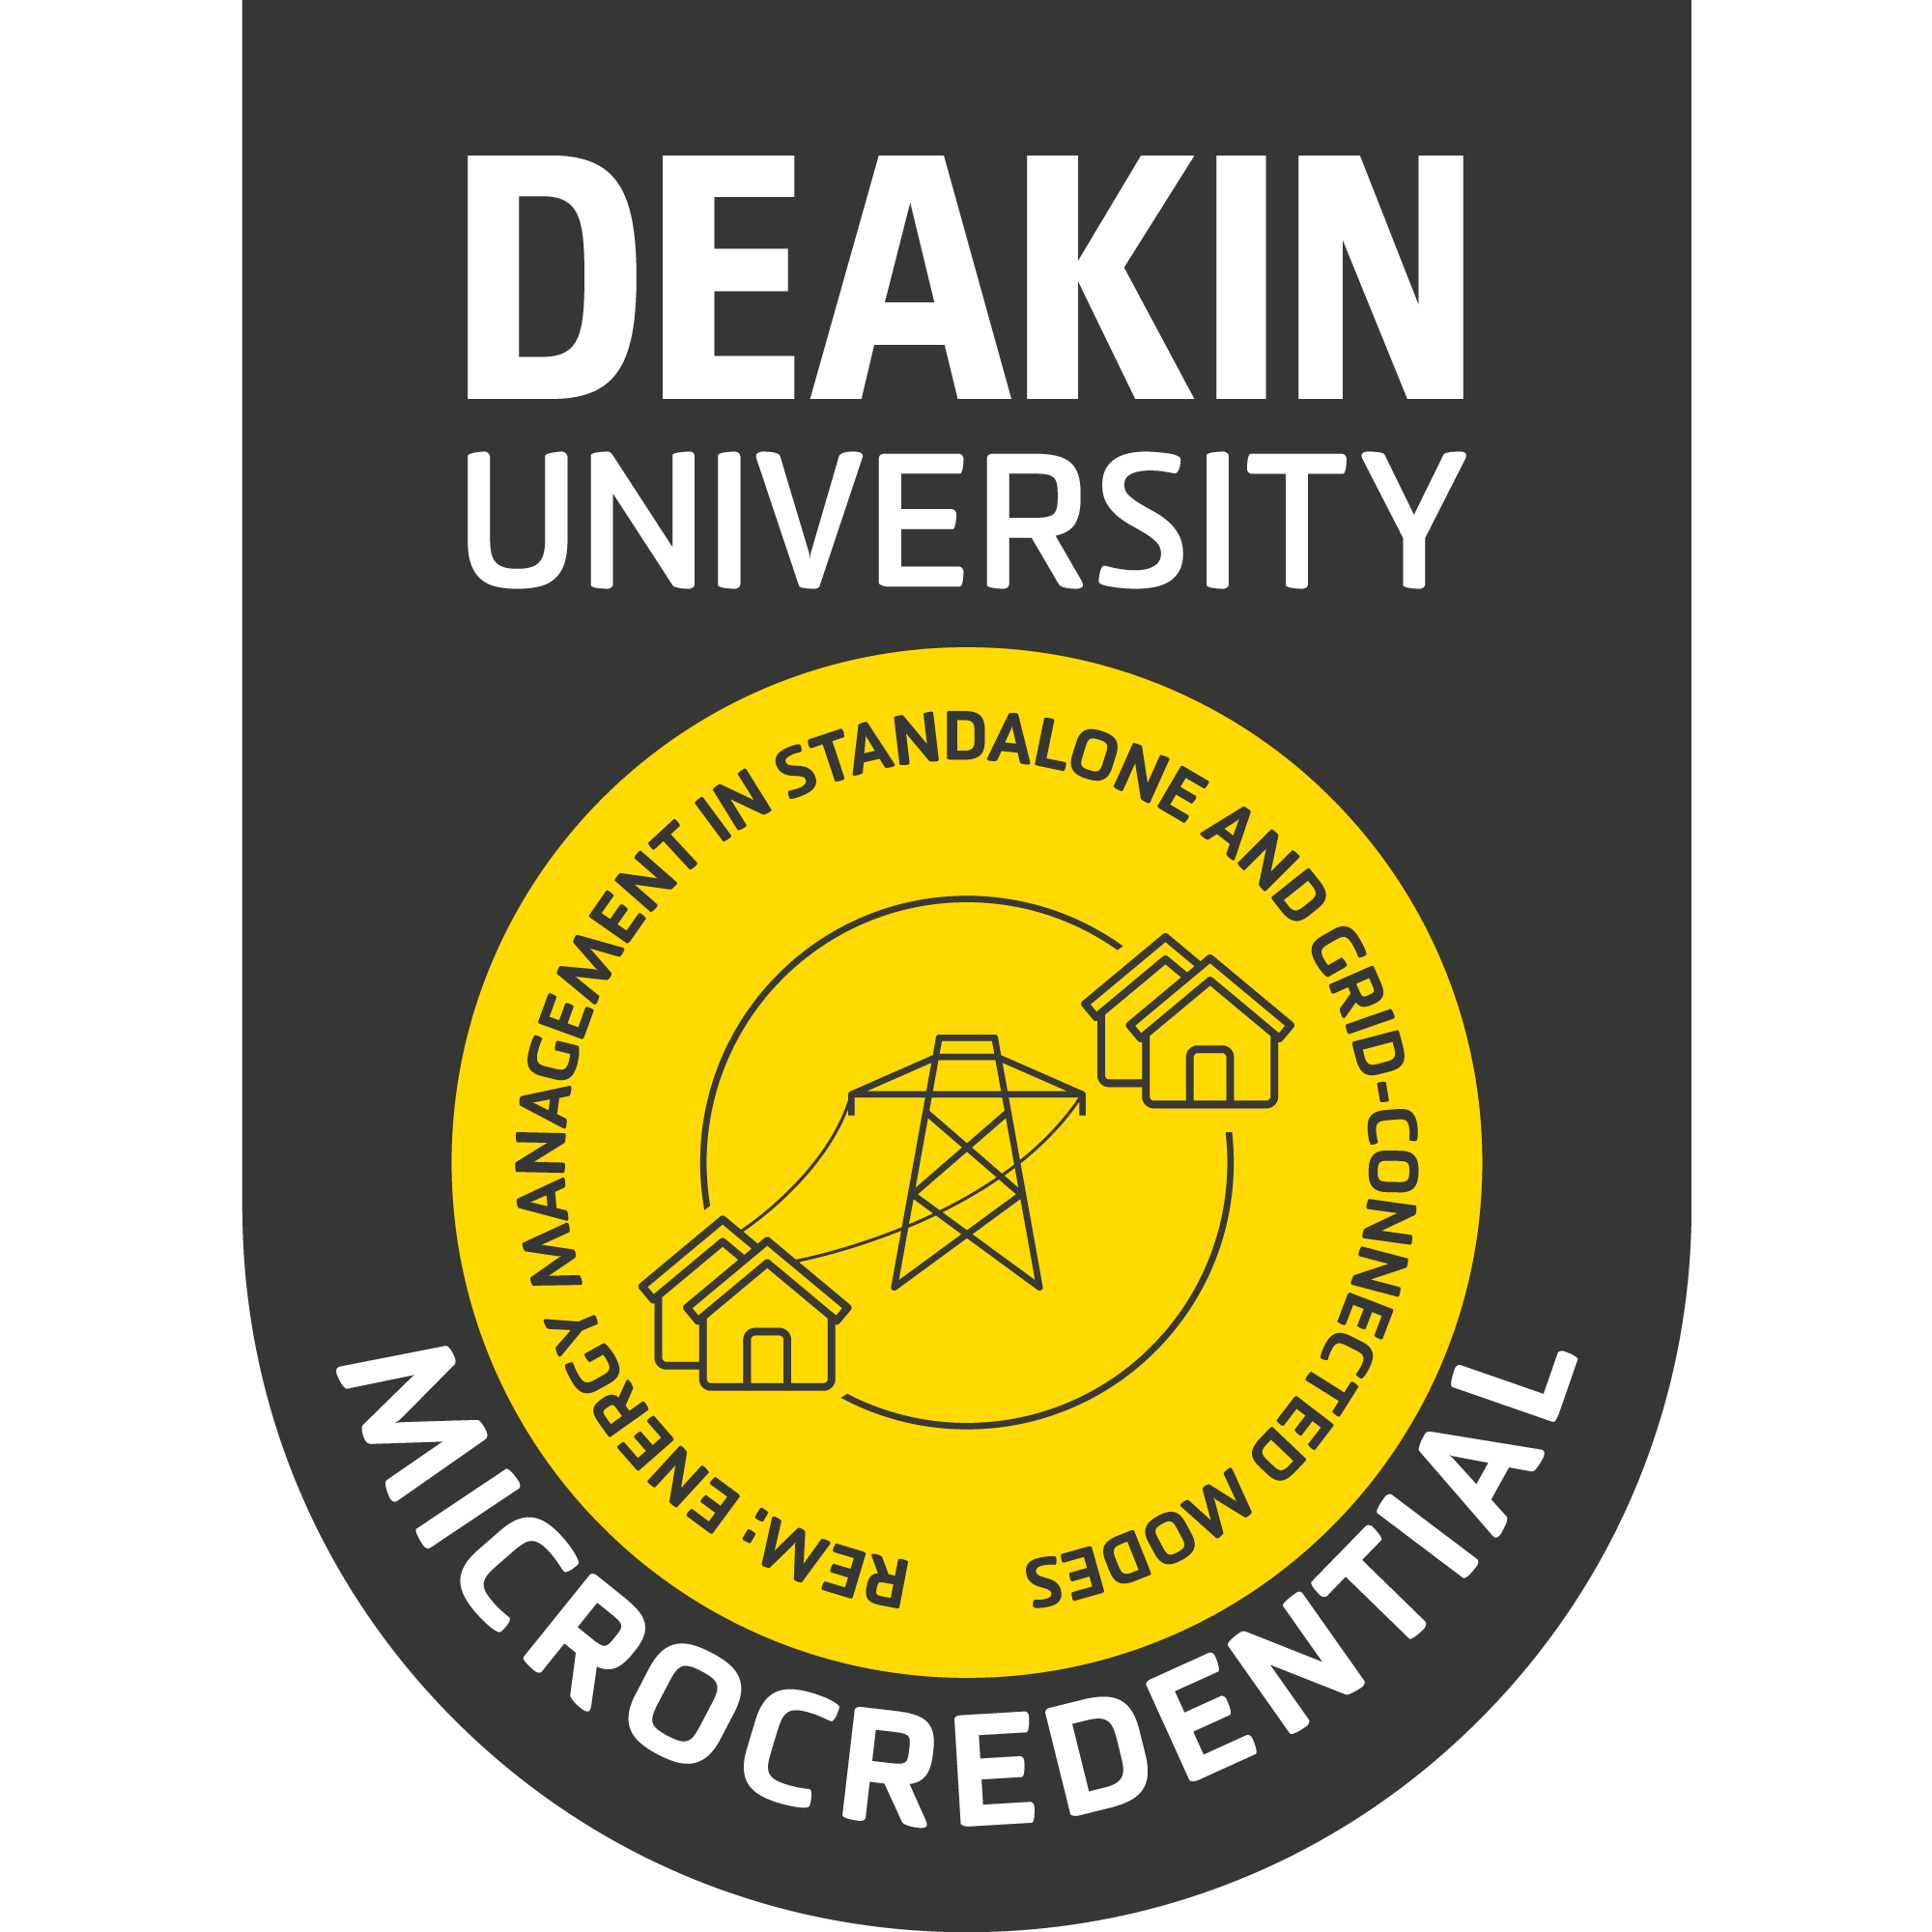 A yellow logo with the text 'Deakin University Microcredential' 